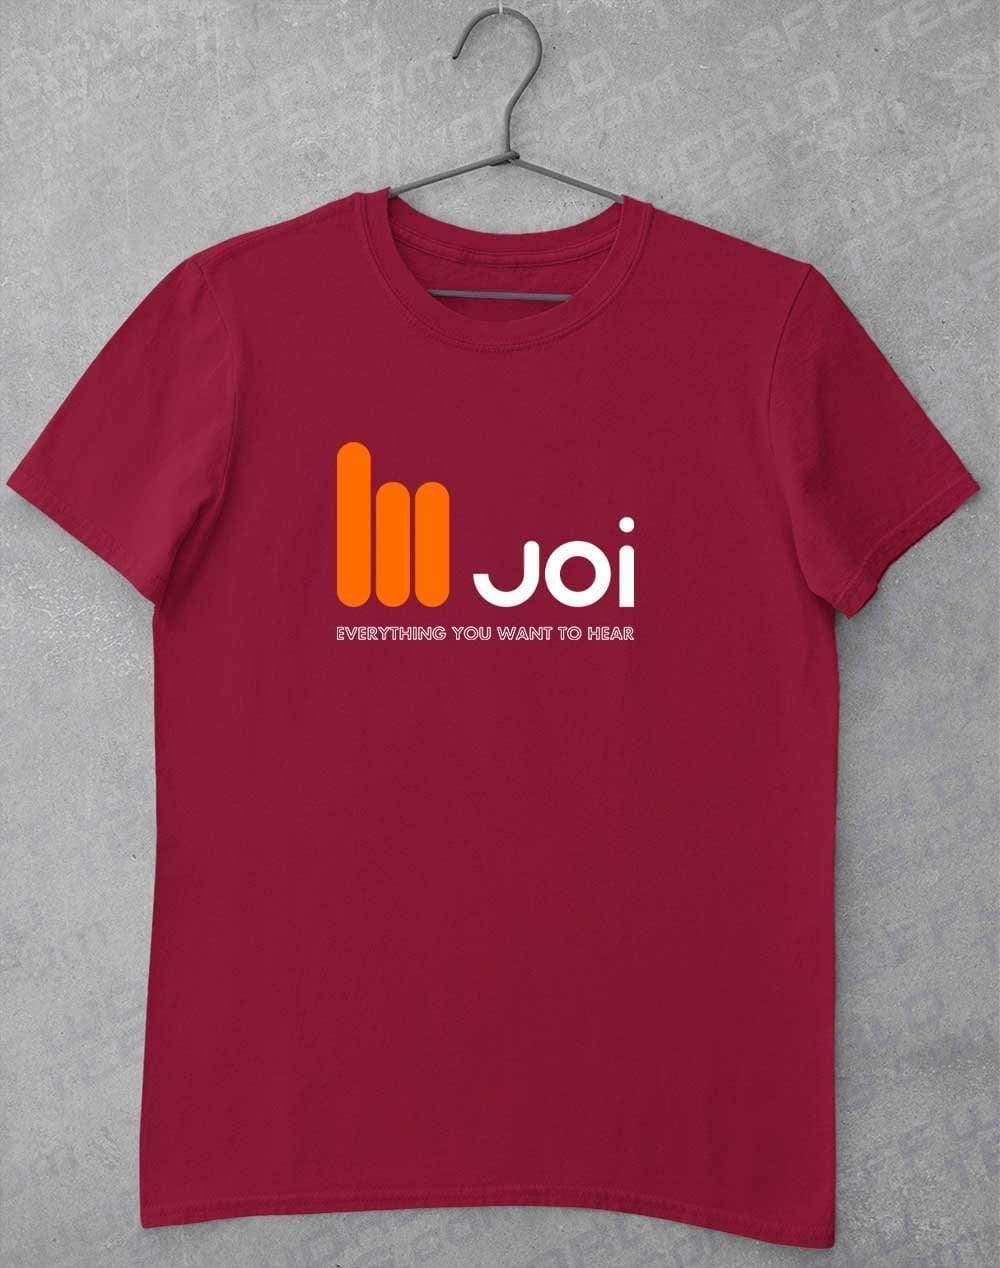 JOI Everything You Want to Hear T-Shirt S / Cardinal Red  - Off World Tees